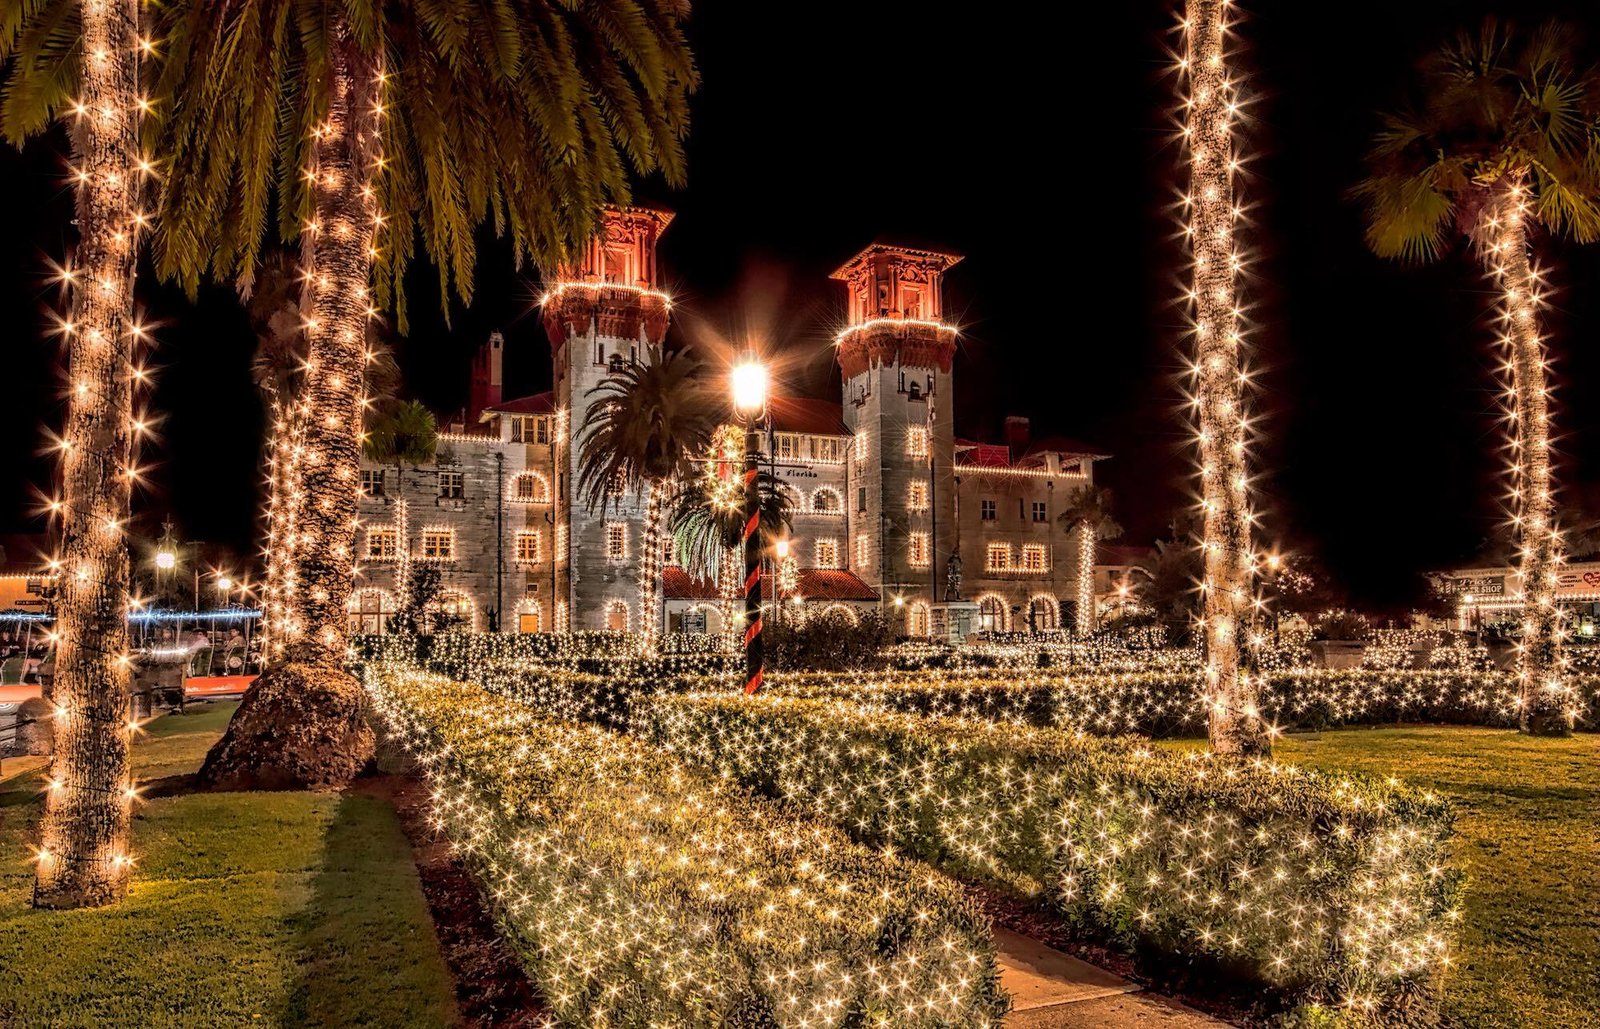 "Sunshine State Celebrations Christmas Food And Travel Highlights In